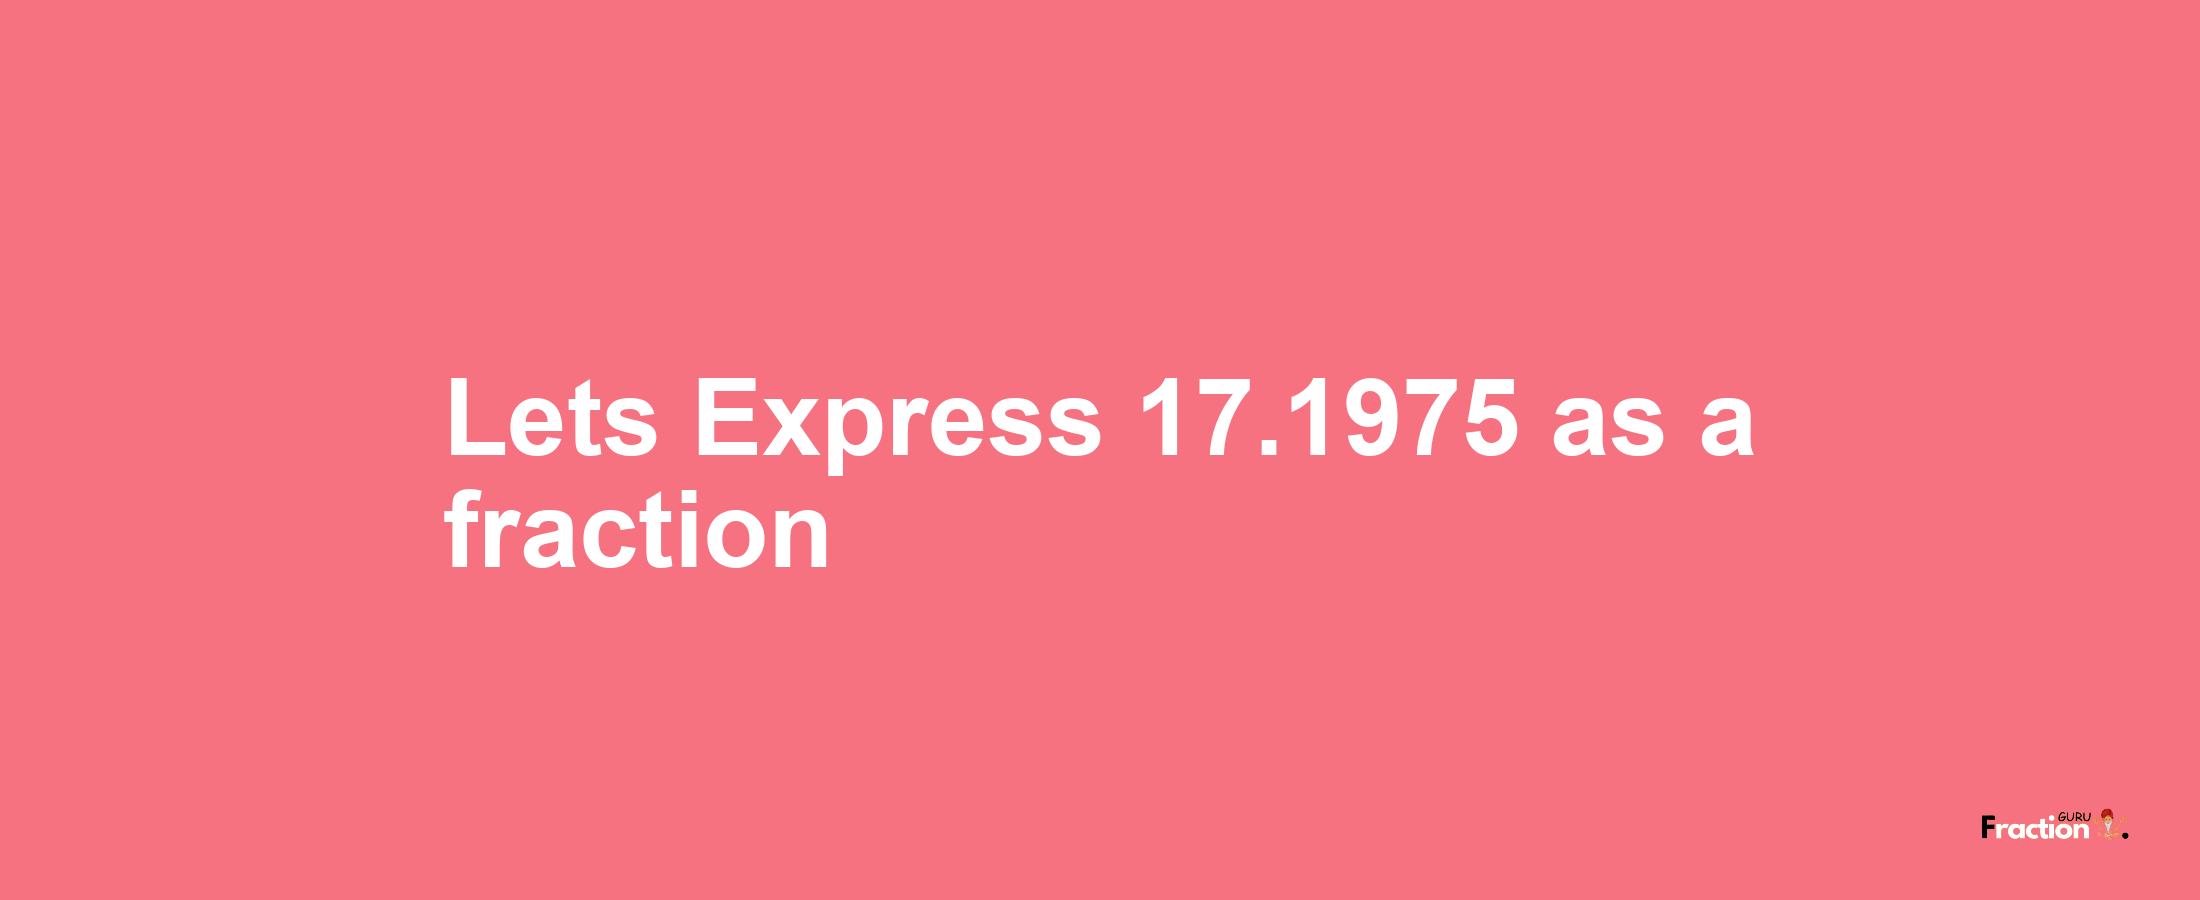 Lets Express 17.1975 as afraction